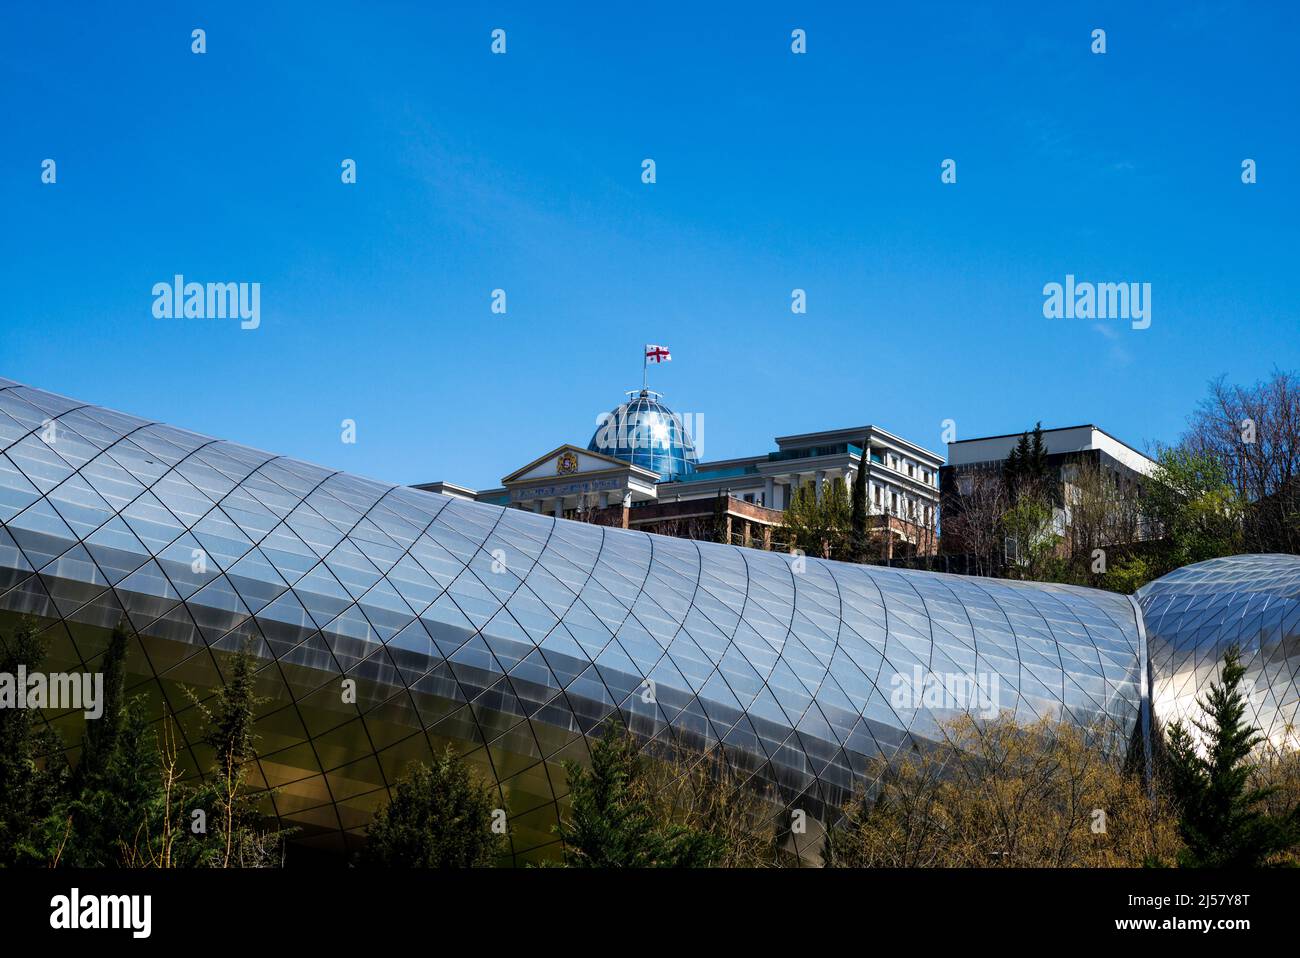 Georgia/Tbilisi: State Palace of Ceremonies and Rike Concert Hall Stock Photo